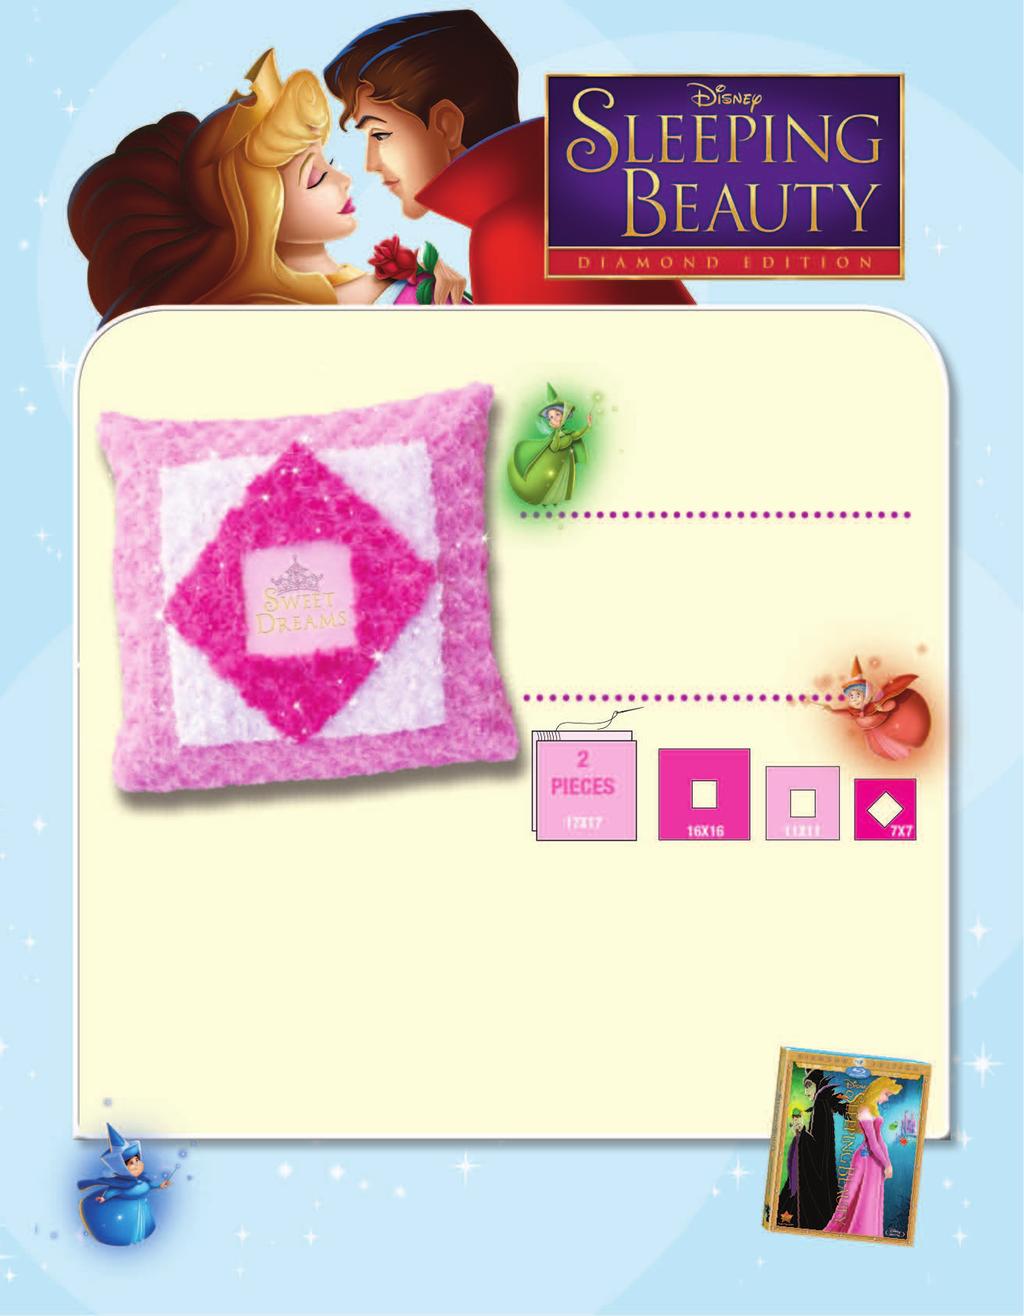 SLEEPING BEAUTY PILLOW Create and decorate your very own Sleeping Beauty pillow and awaken each morning with sweet dreams.